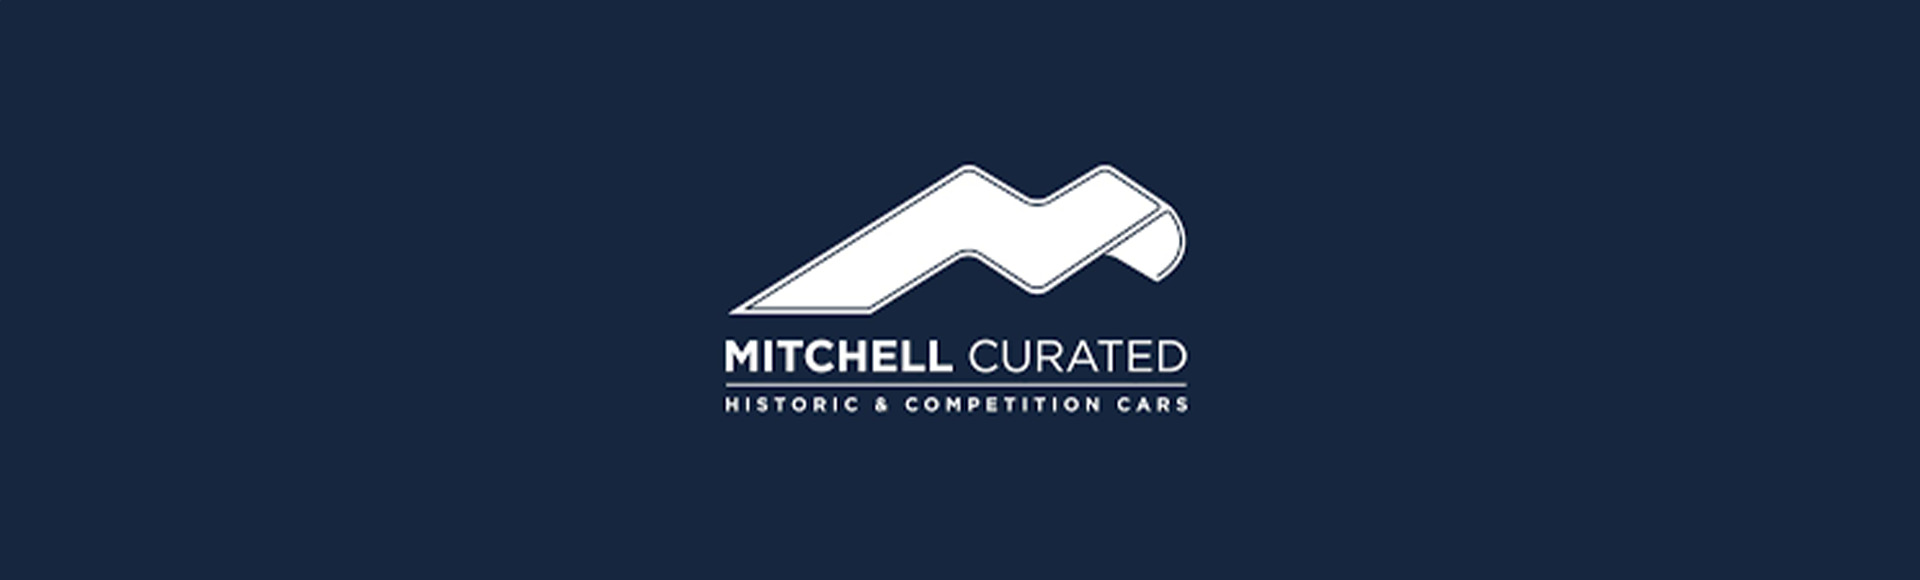 Mitchell Curated